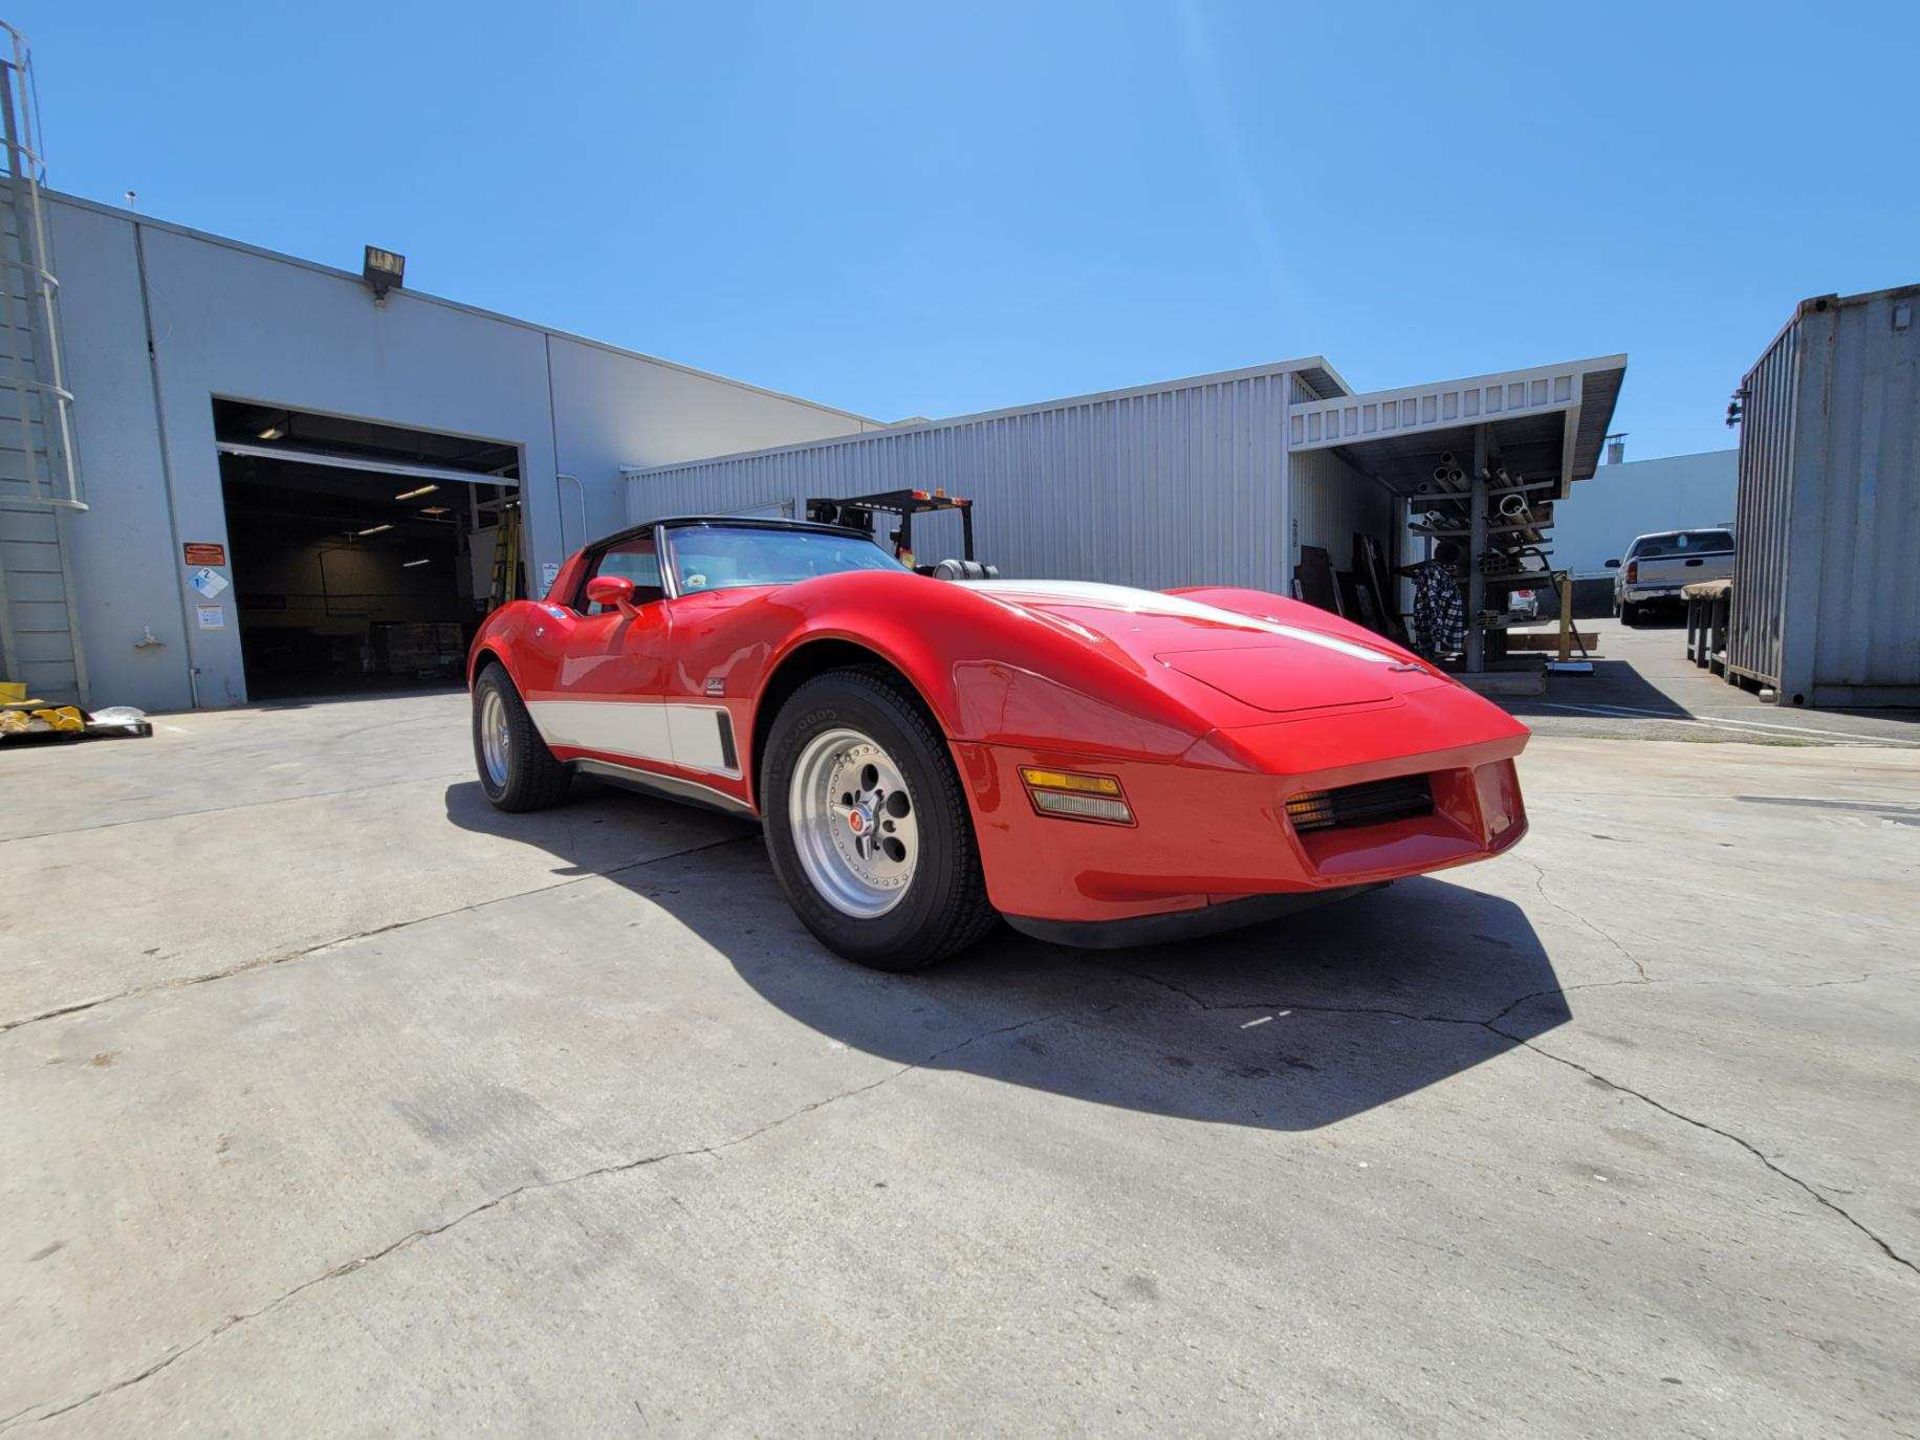 1980 CHEVROLET CORVETTE, WAS VIC EDELBROCK'S PERSONAL CAR BOUGHT FOR R&D, RED INTERIOR, TITLE ONLY. - Image 64 of 70